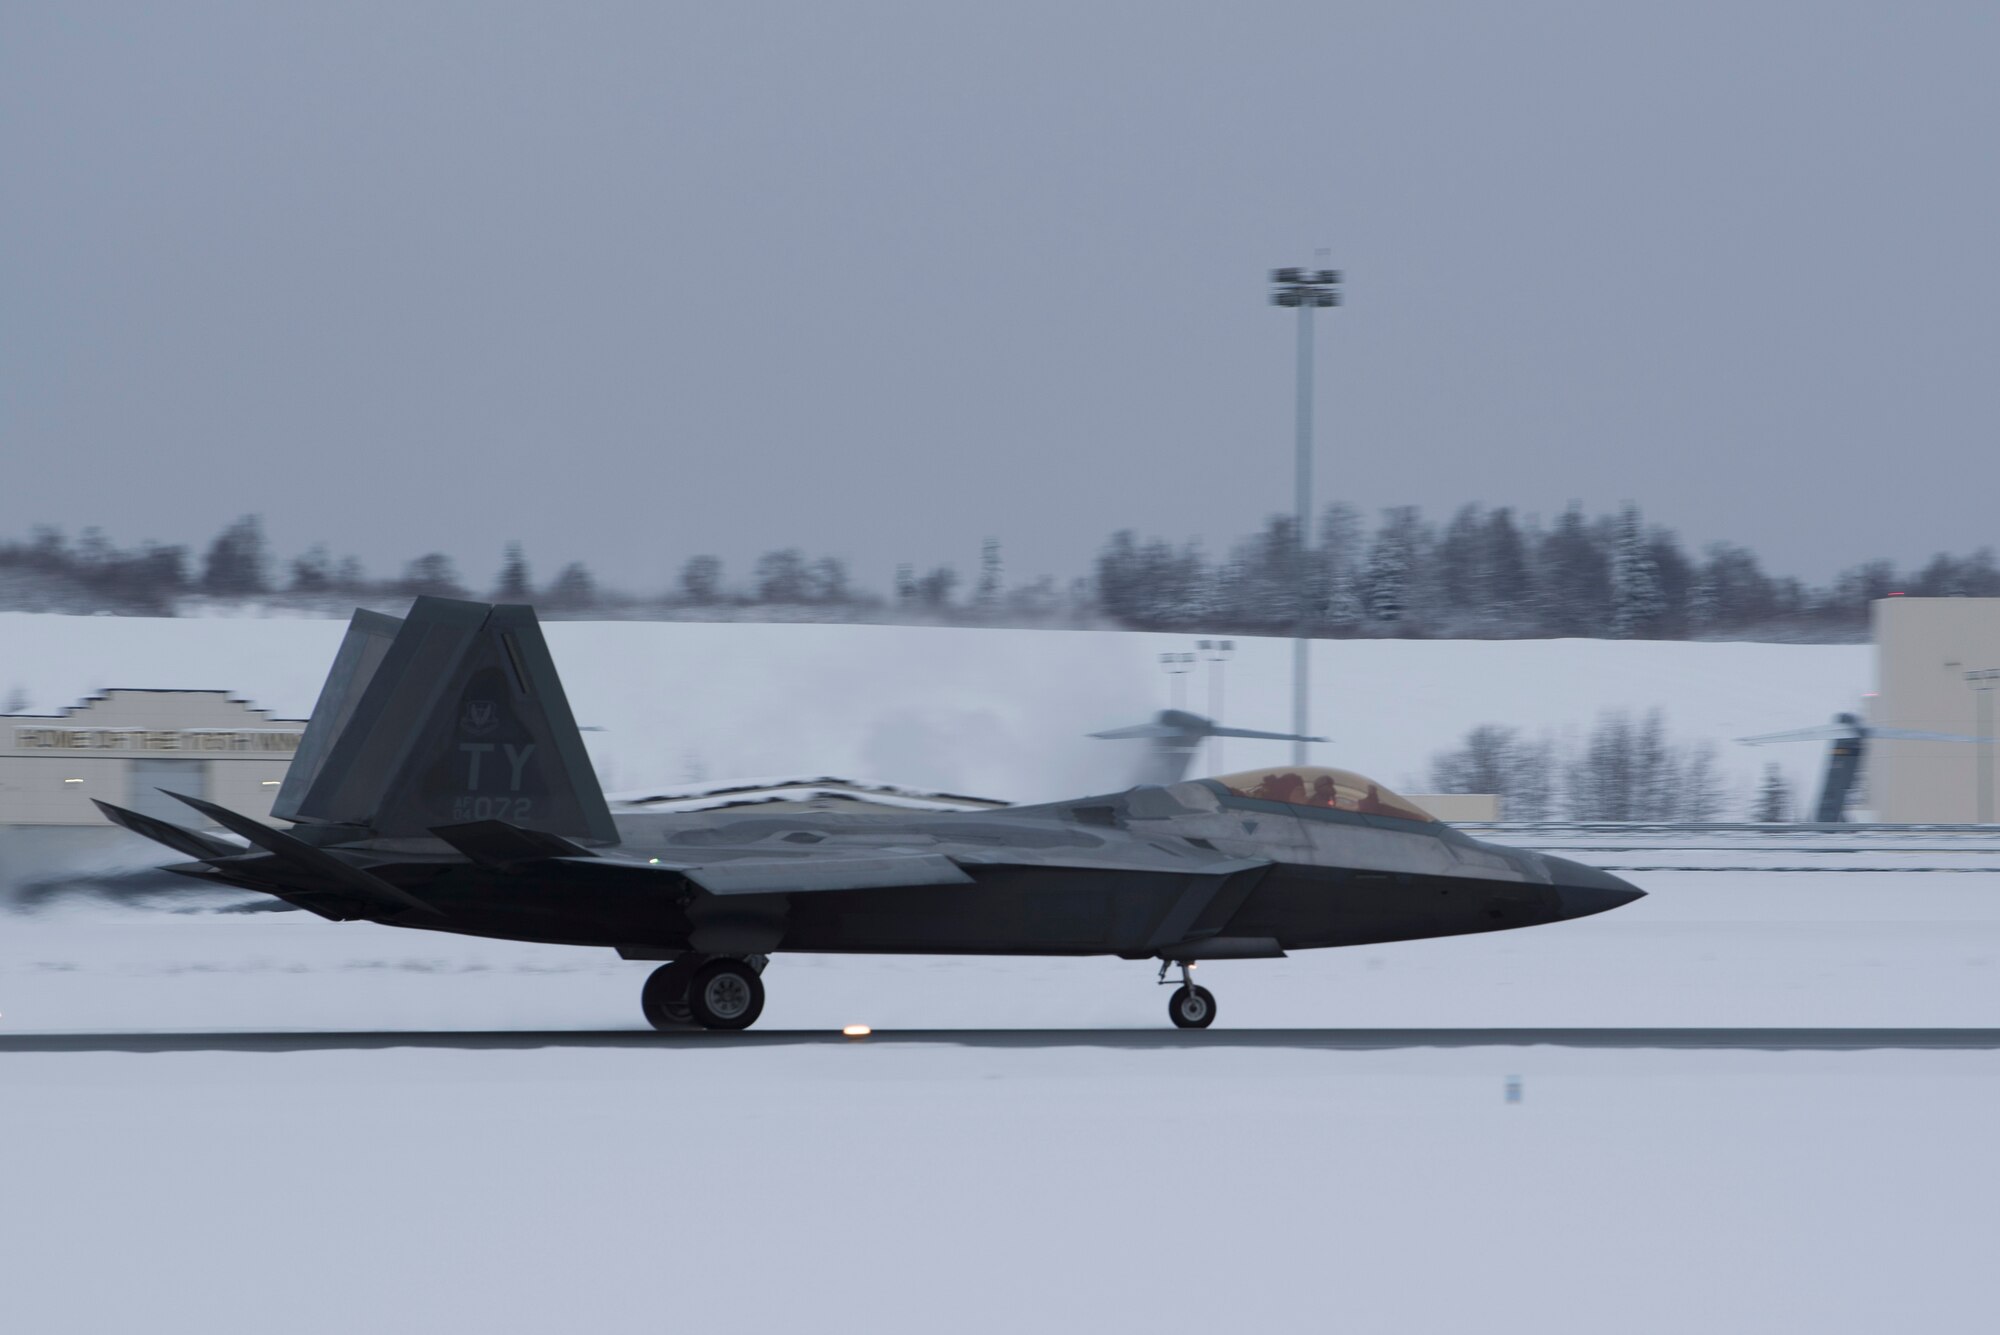 A U.S. Air Force F-22 Raptor assigned to the 95th Fighter Squadron from Tyndall Air Force Base, Florida, taxis on the runway at Joint Base Elmendorf-Richardson, Alaska, Dec. 17, 2018.